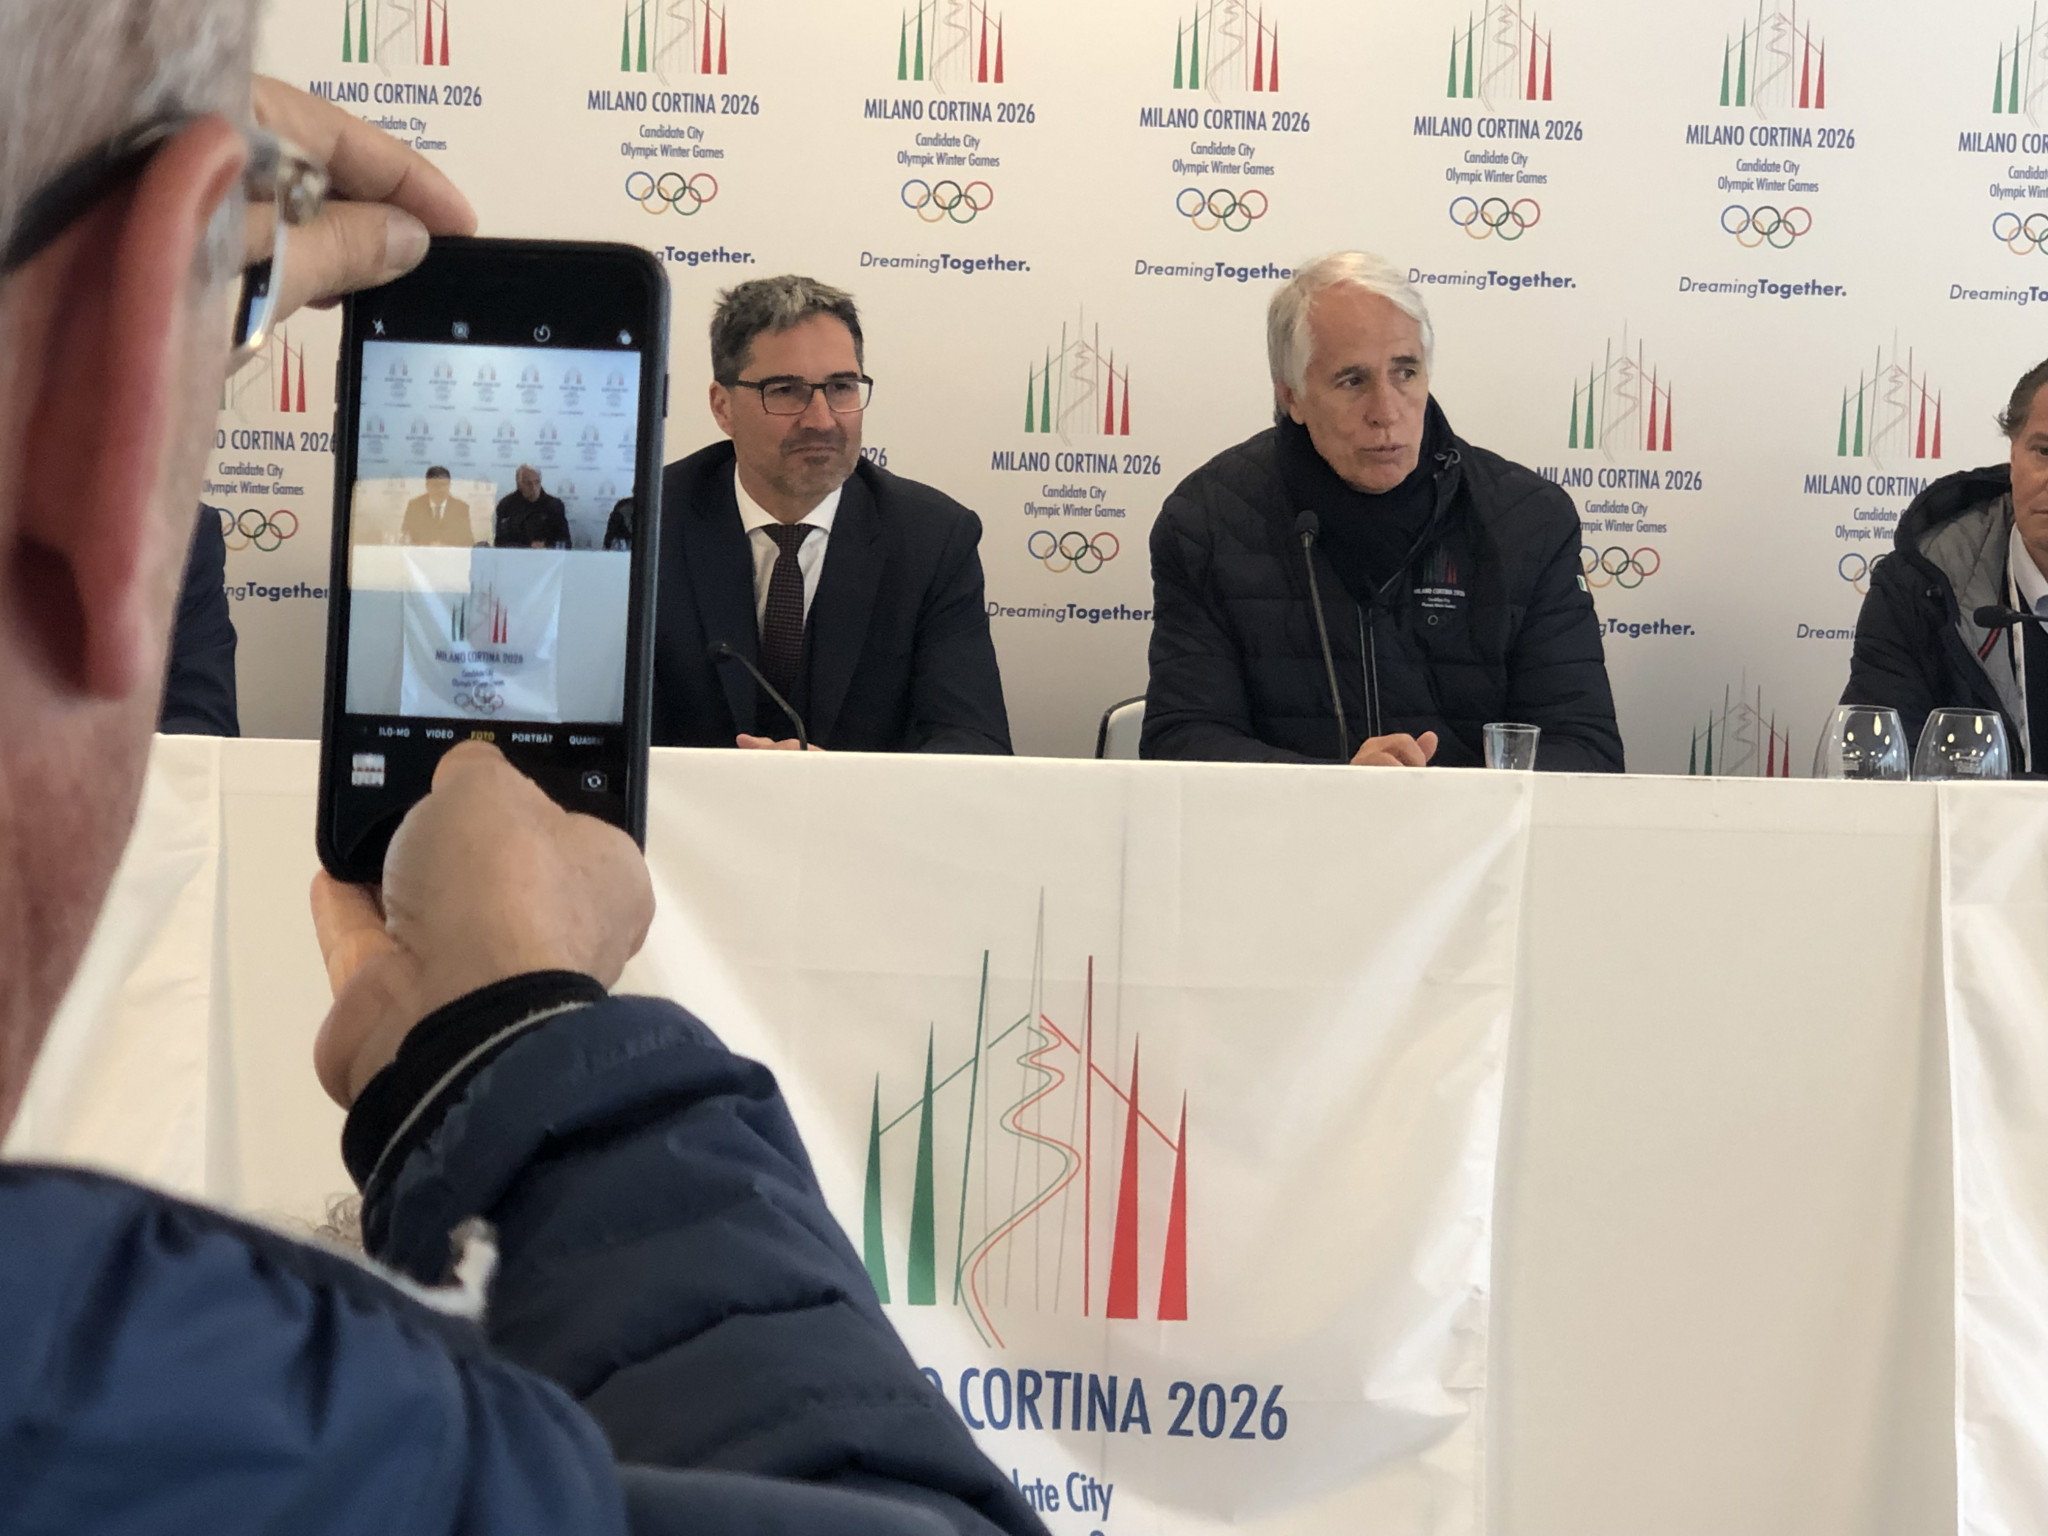 Milan Cortina 2026 referendum ruled out because claimed so many Italians support it